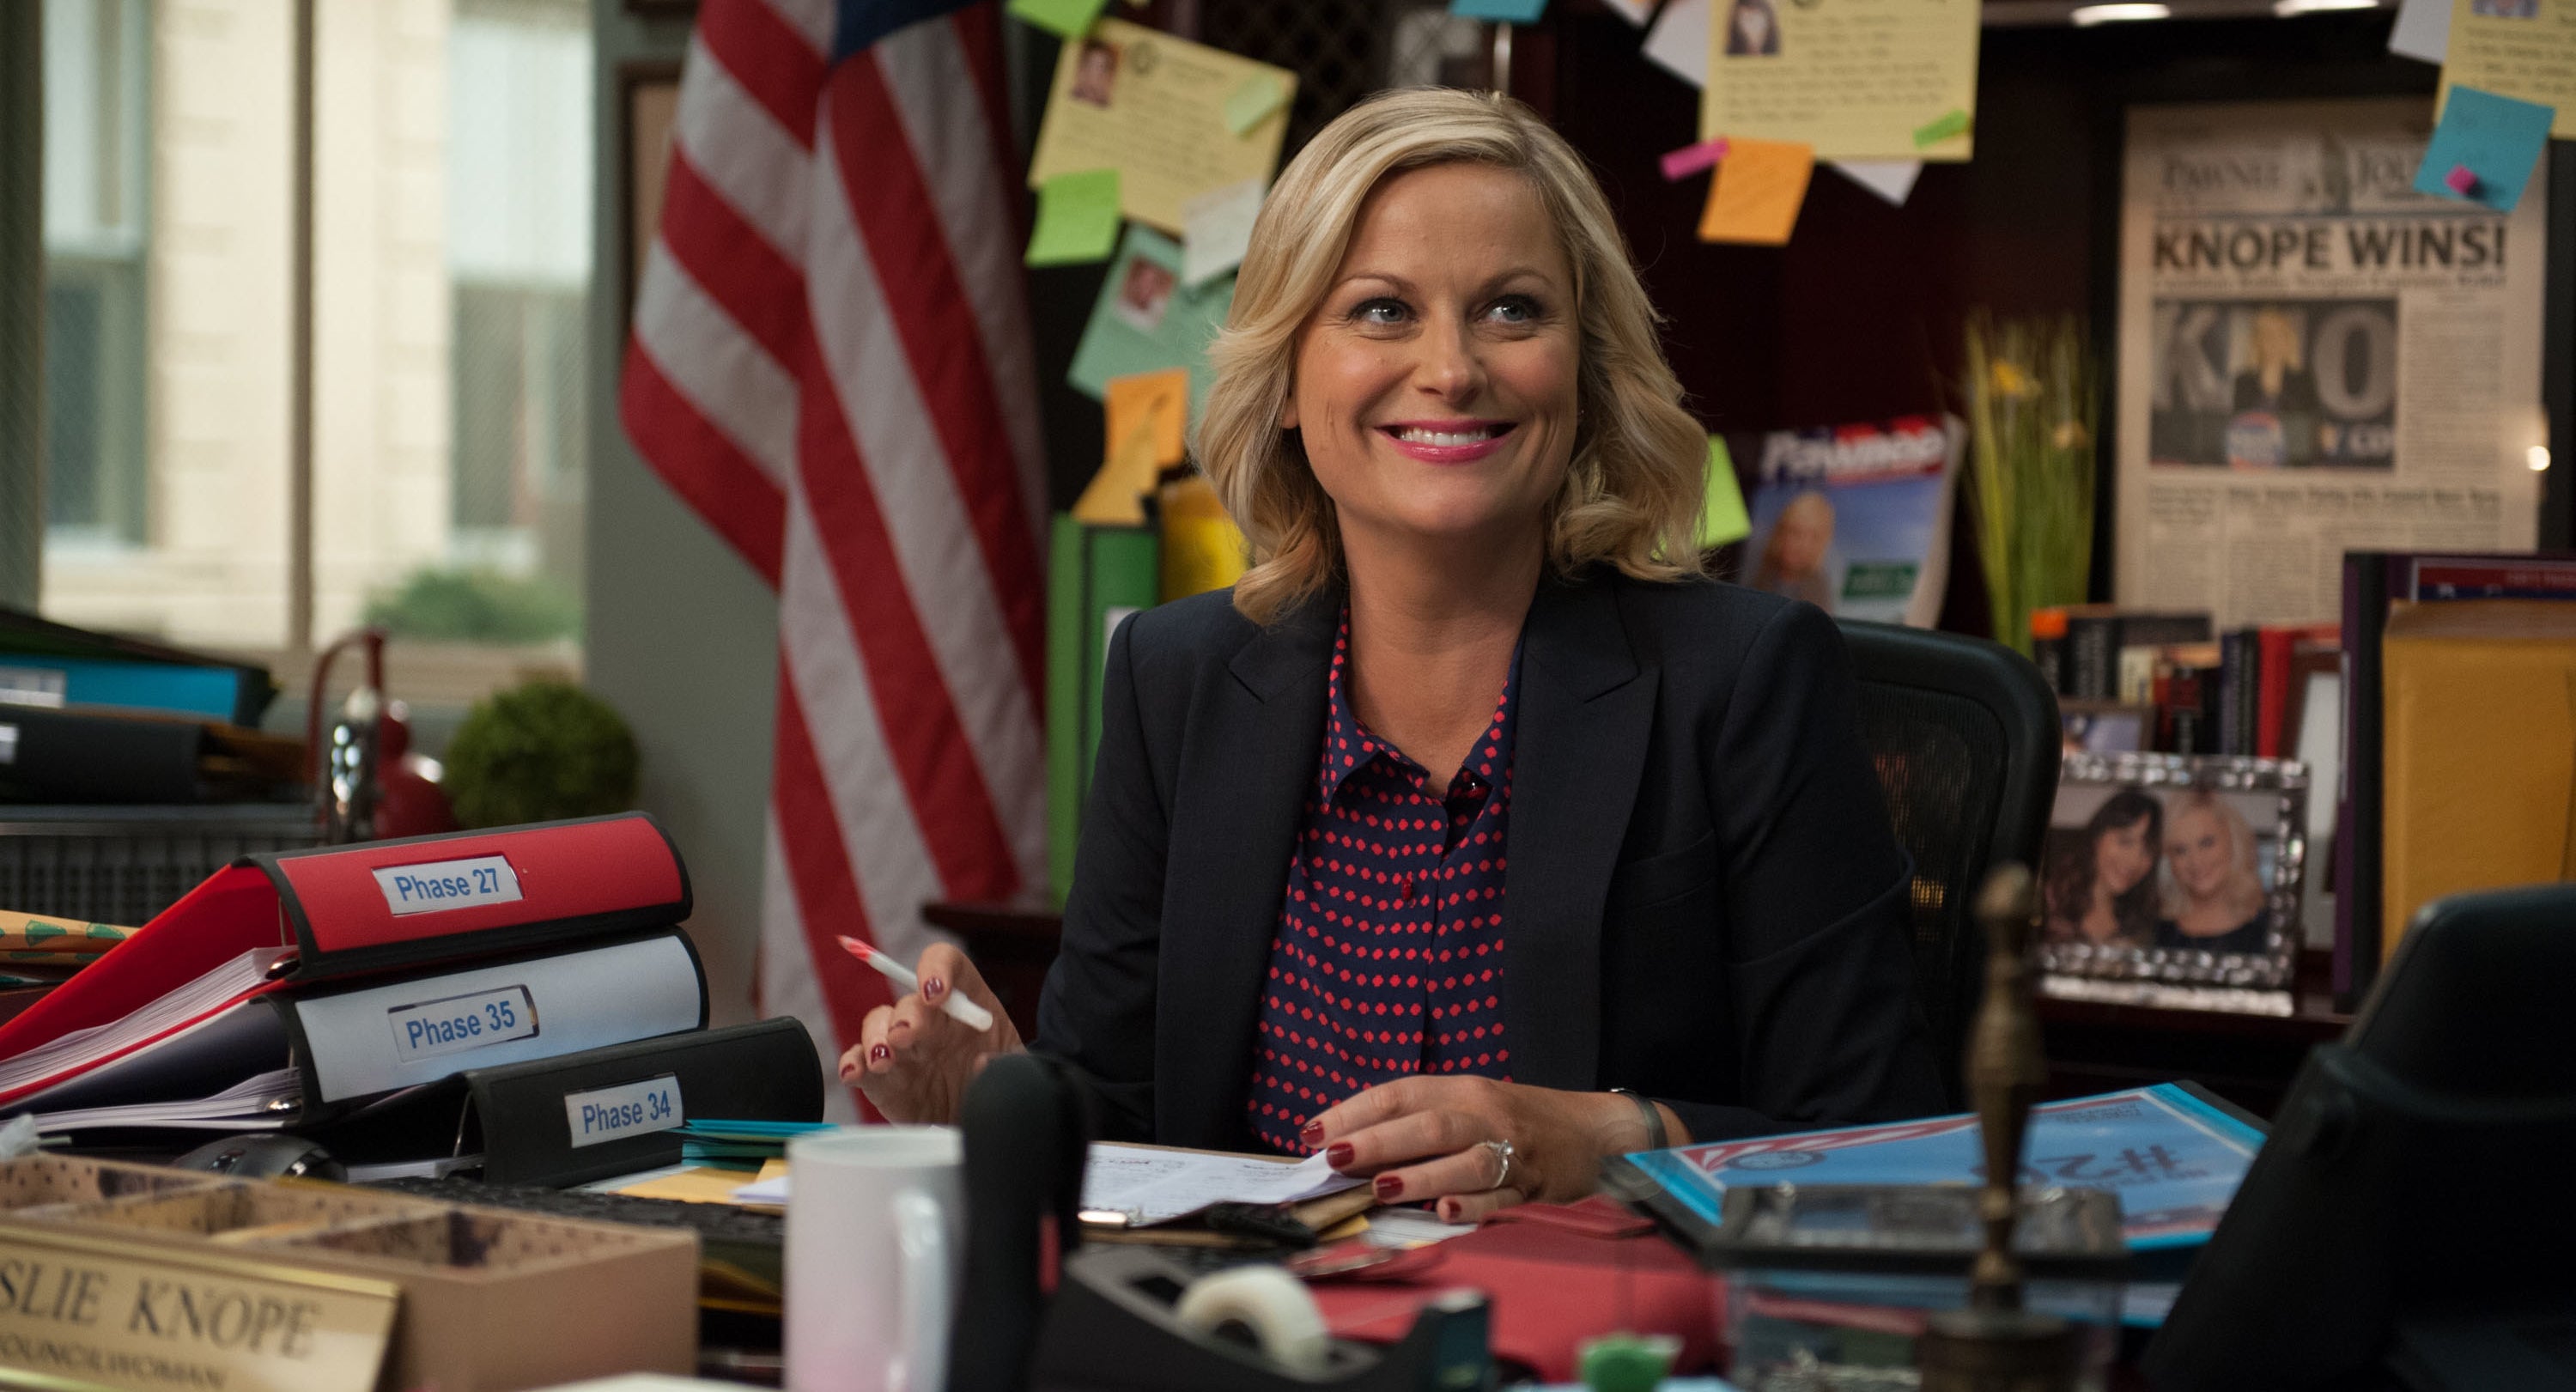 Leslie sitting at her desk in &quot;Parks and Recreation&quot;